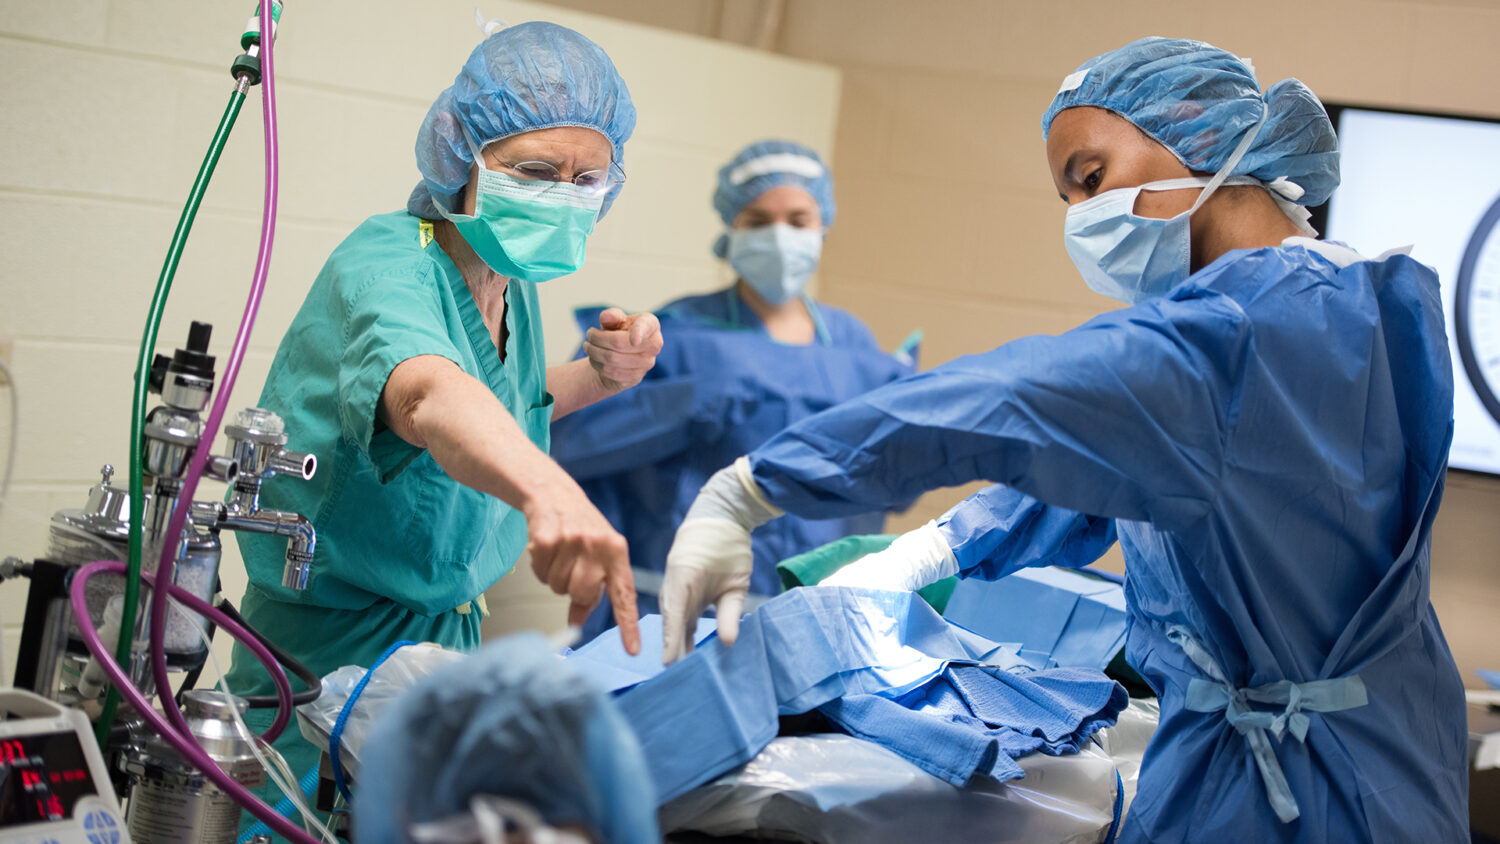 Surgeons work together to help a patient in their operating room.